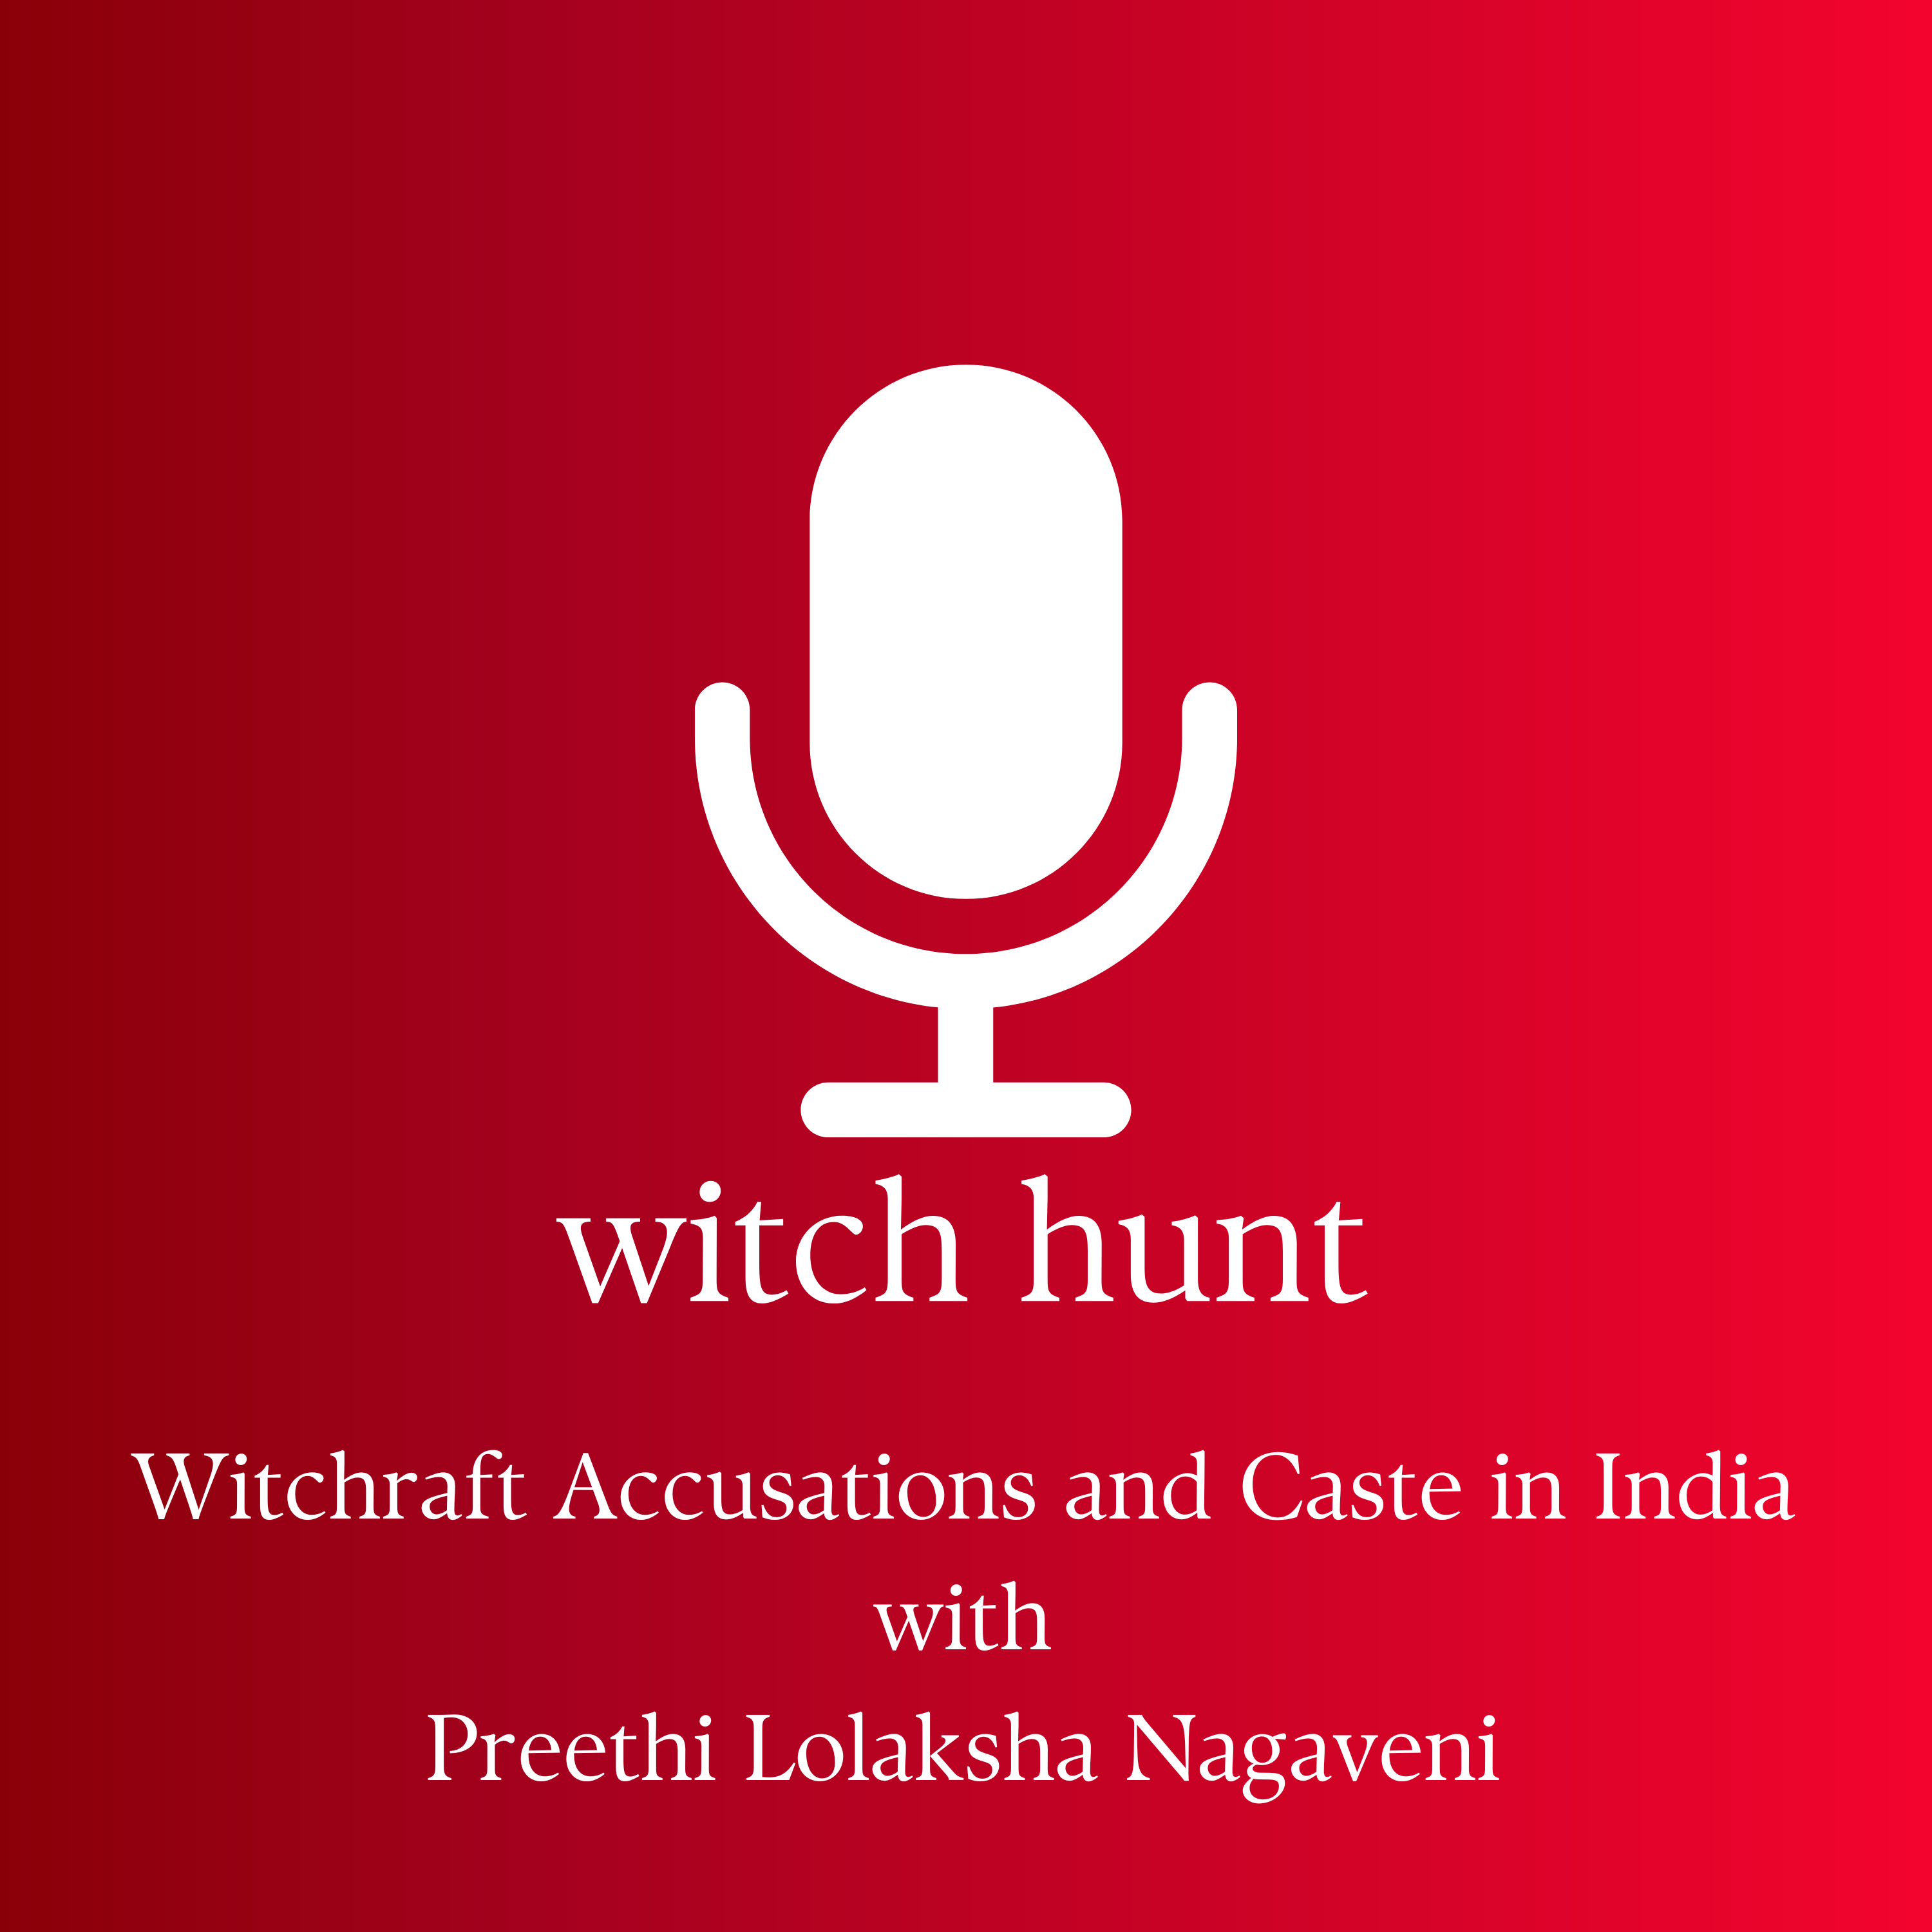 Podcast Episode: Witchcraft Accusations and Caste in India with Preethi Lolaksha Nagaveni